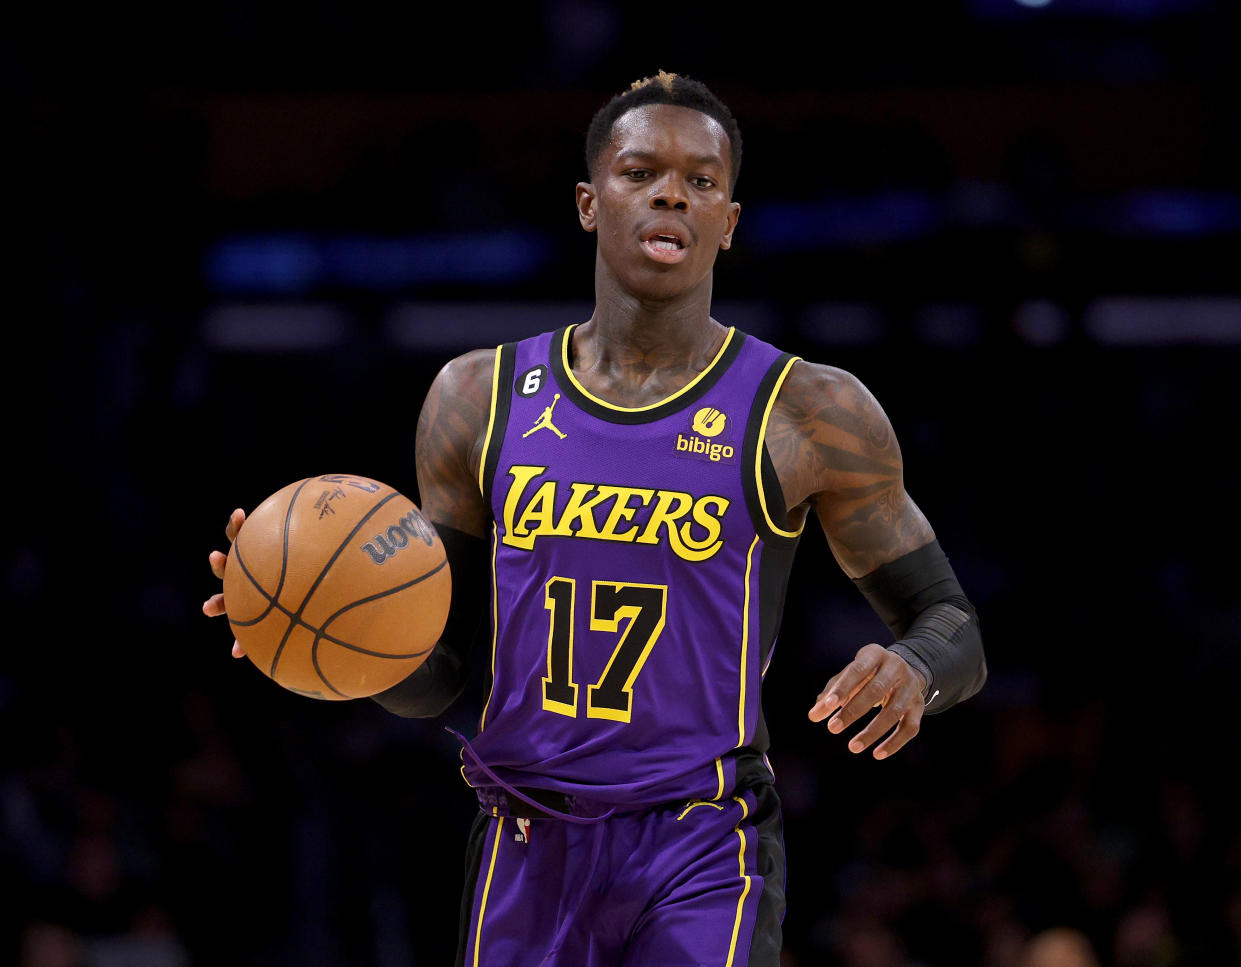 Dennis Schroder is worth a look in fantasy due to the Lakers' injuries.